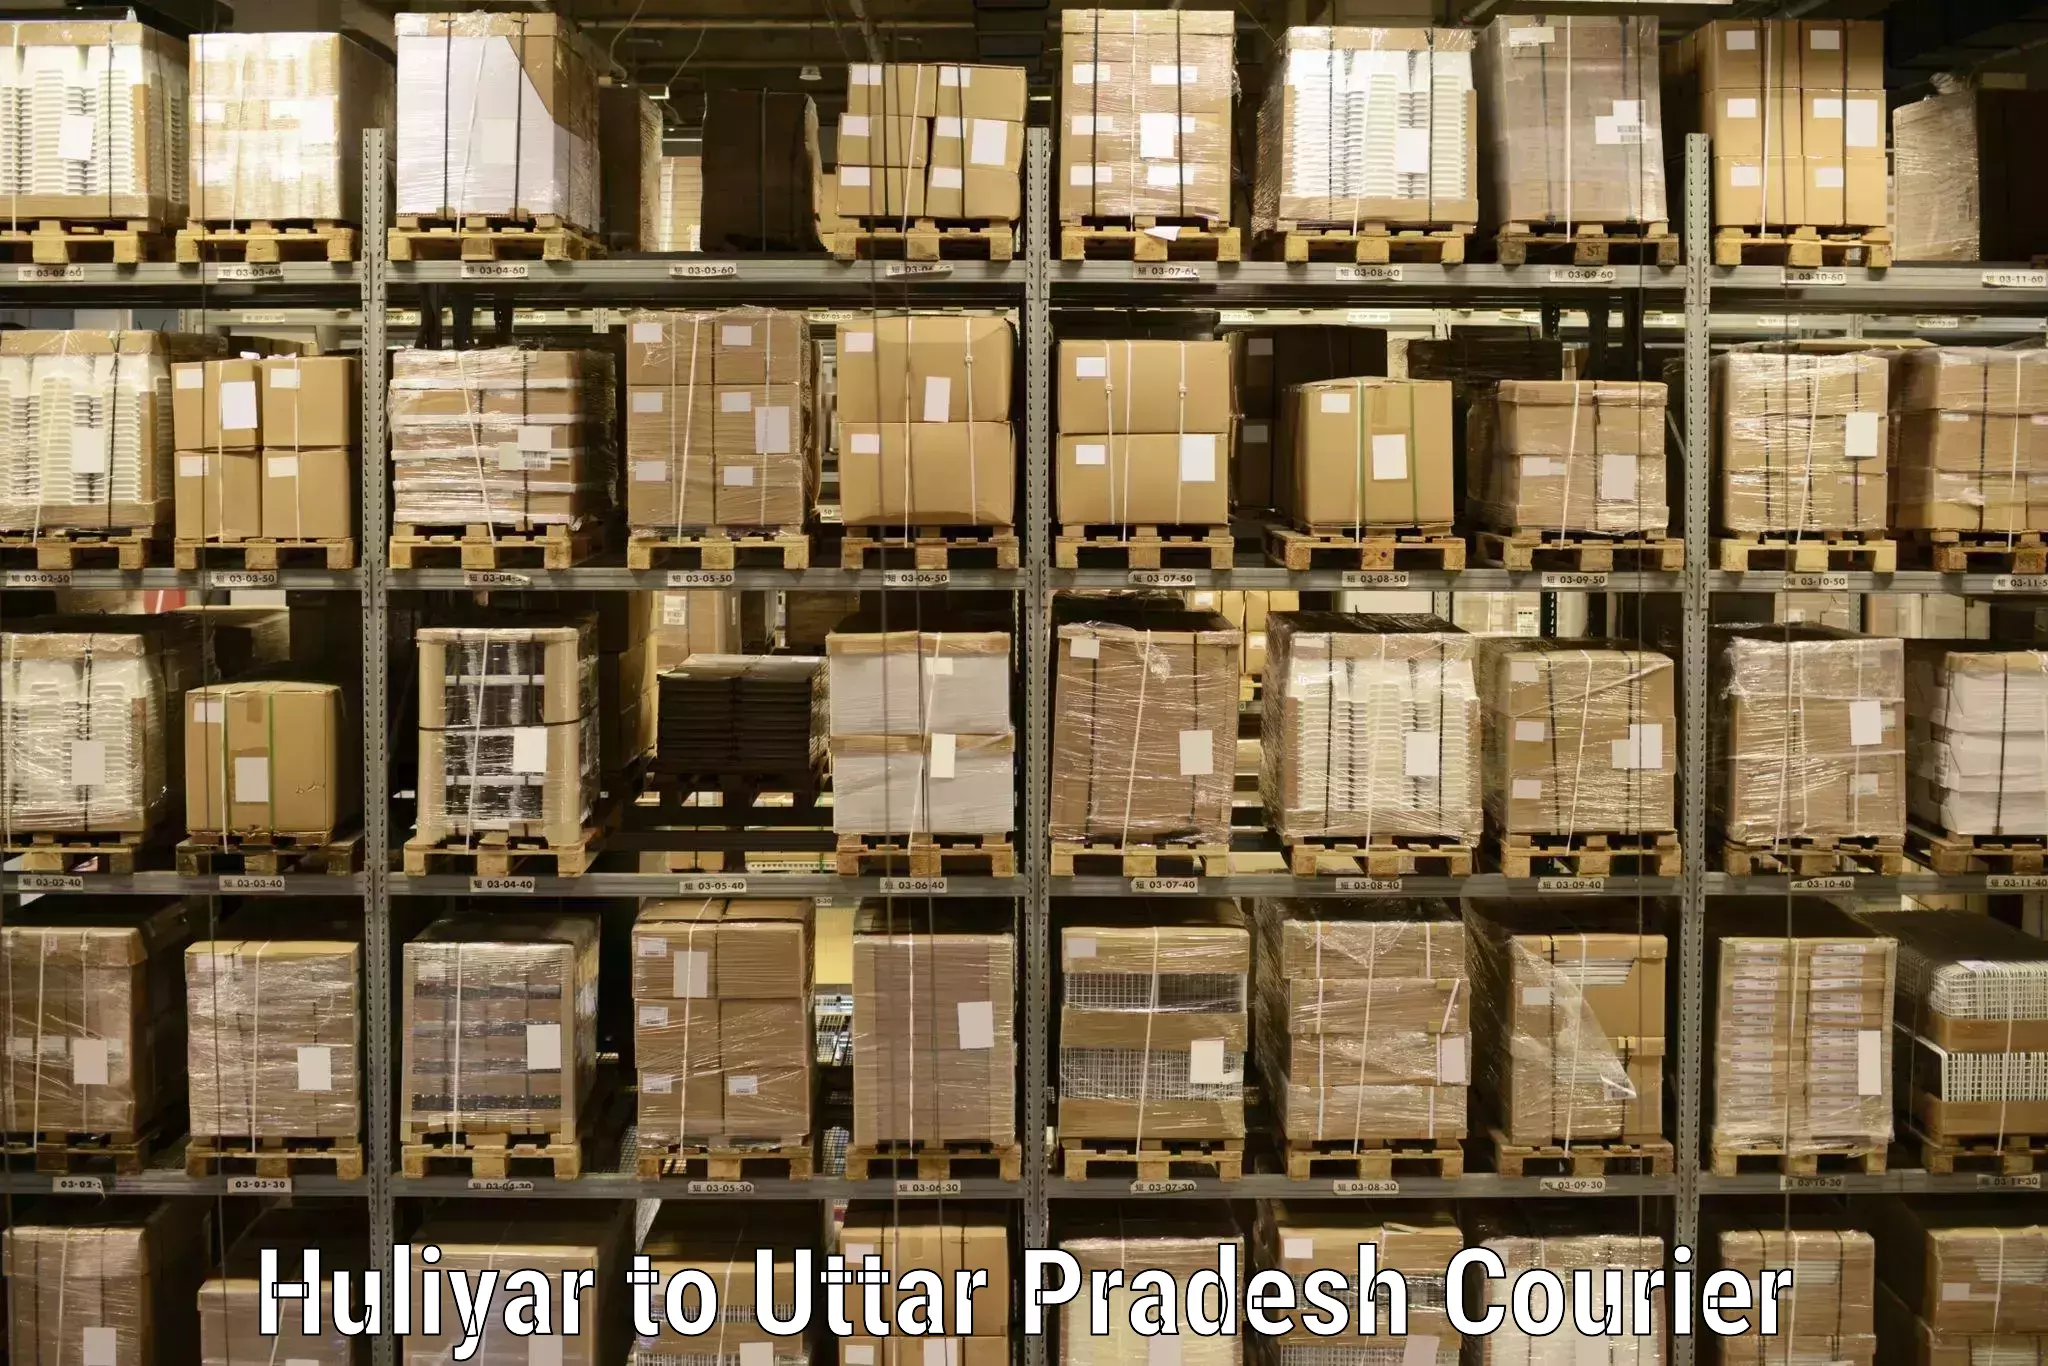 High-quality delivery services Huliyar to Bareilly